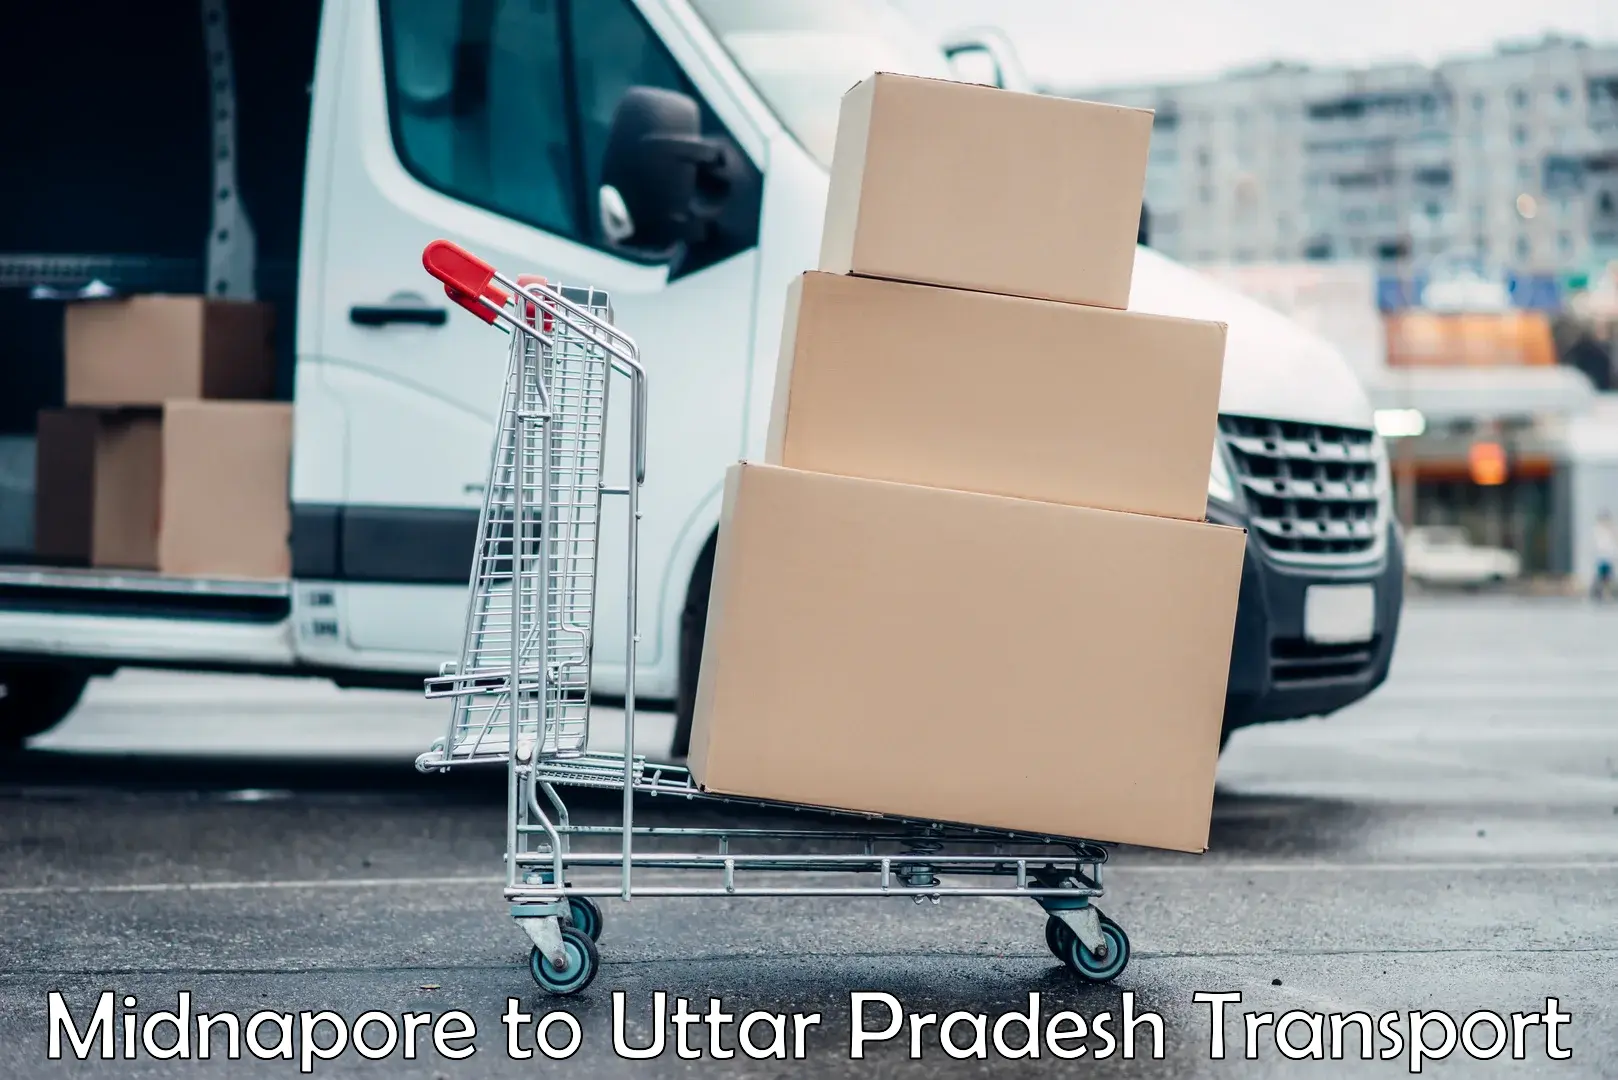 Furniture transport service Midnapore to Farrukhabad